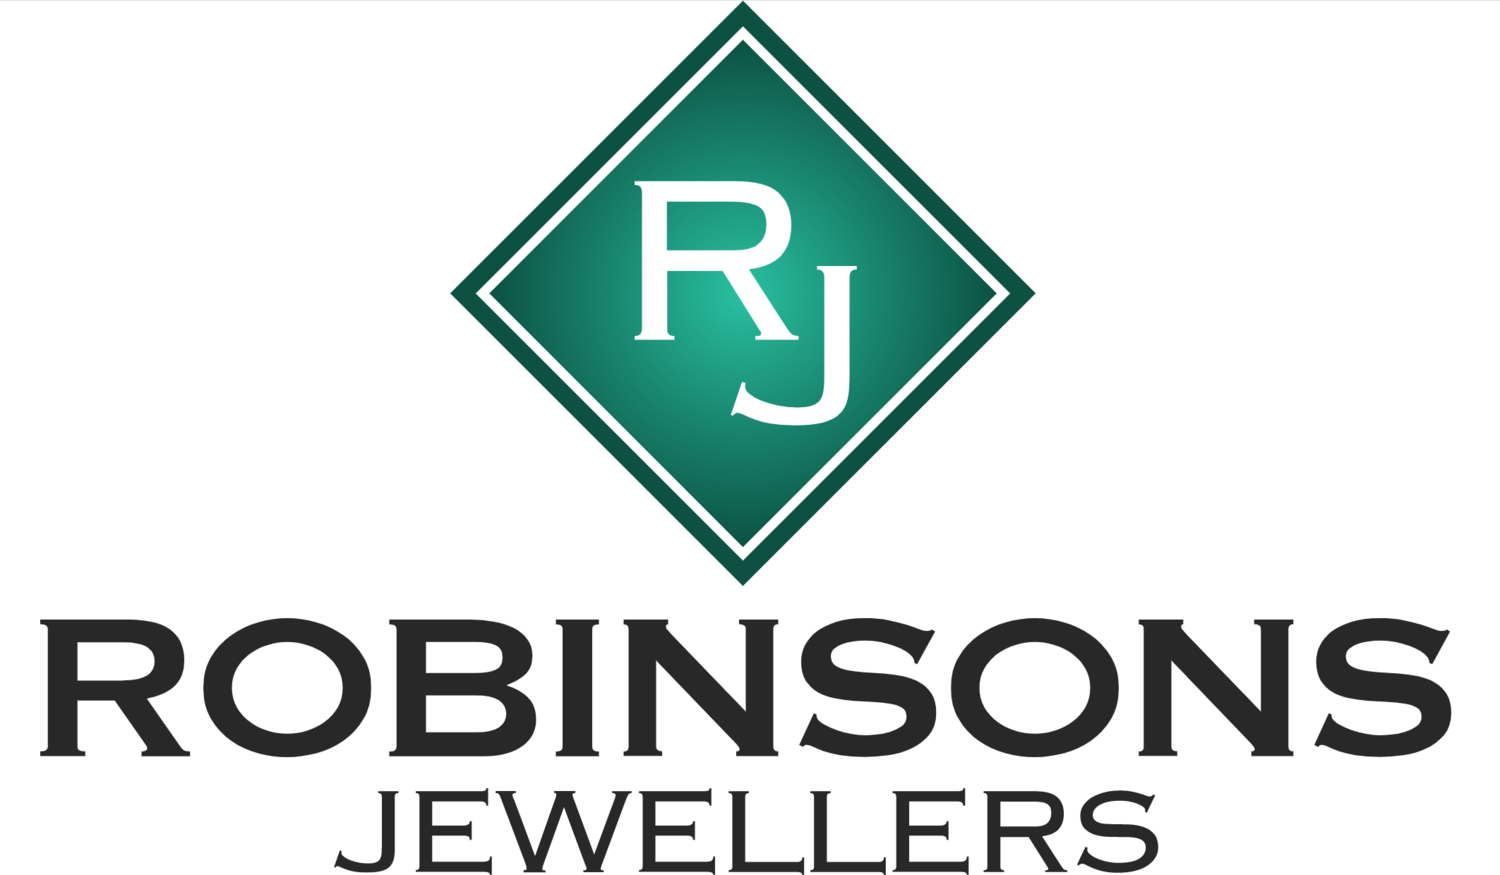 Pre-Owned Watches – Robinson's Jewelers